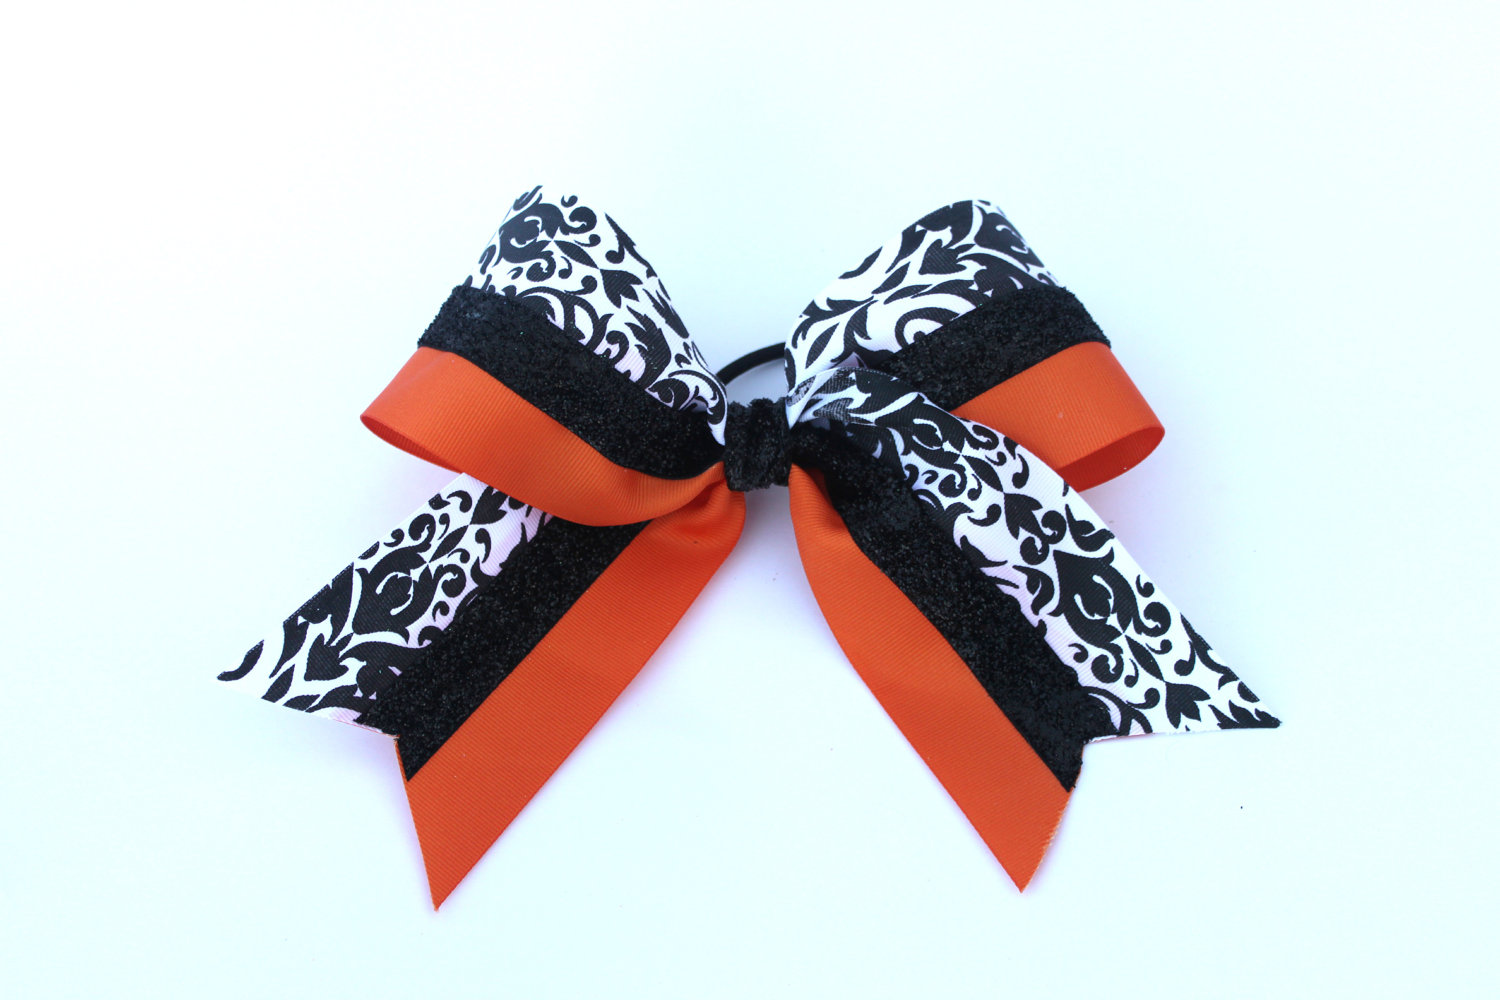 Blue Cheer Bow Clipart And Orange Cheer Bow